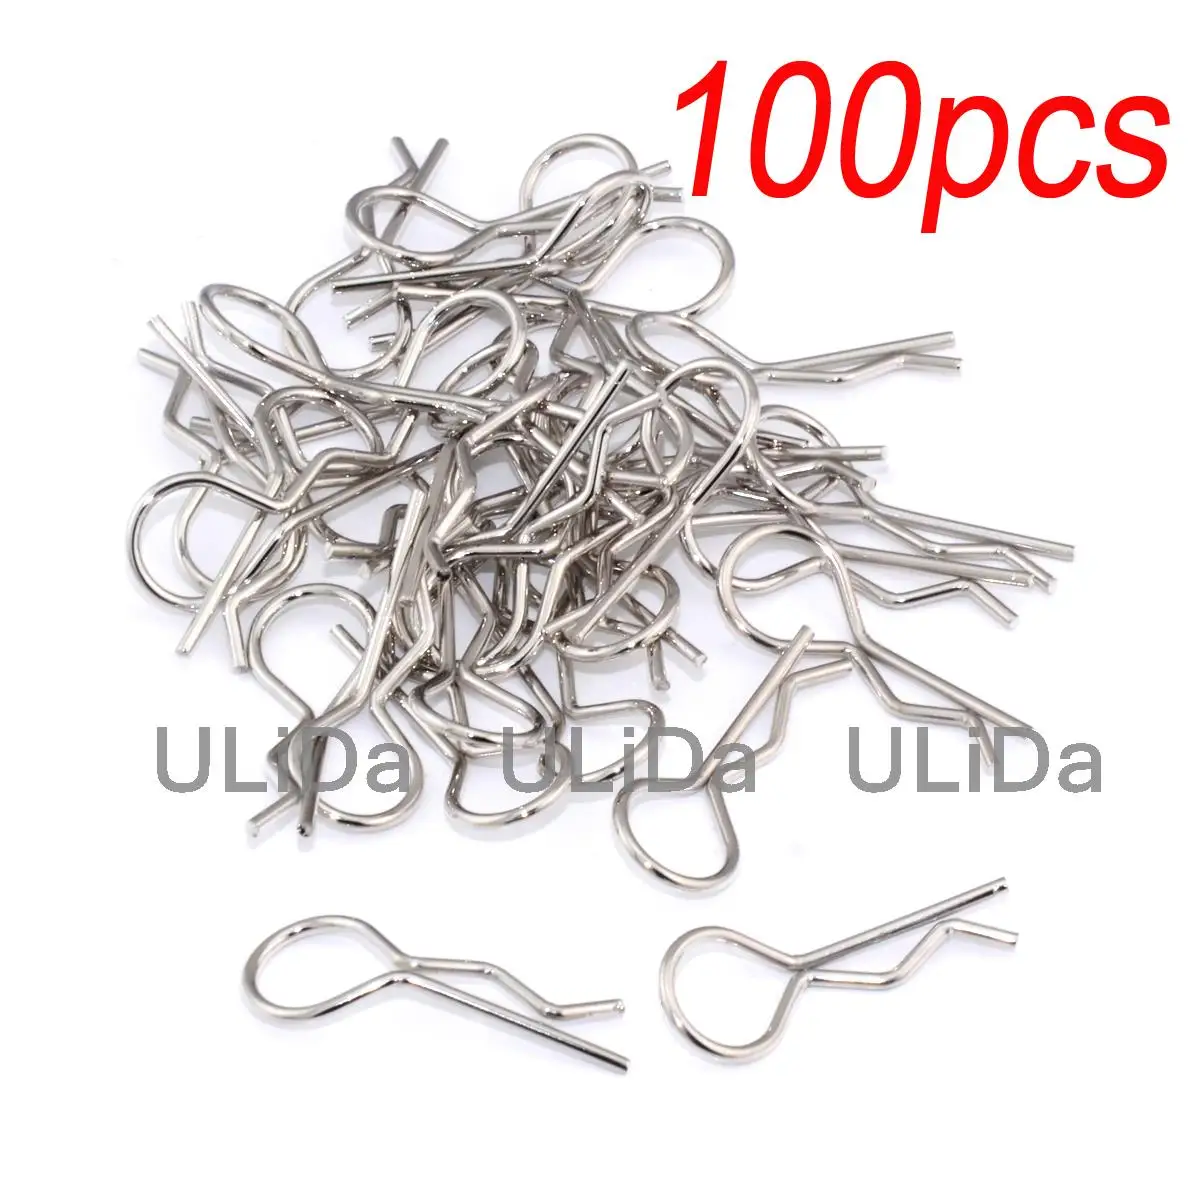 100pcs/lot Body Shell Clip Pin For HSP RC 1/8 Car Buggy Truck Spare Parts